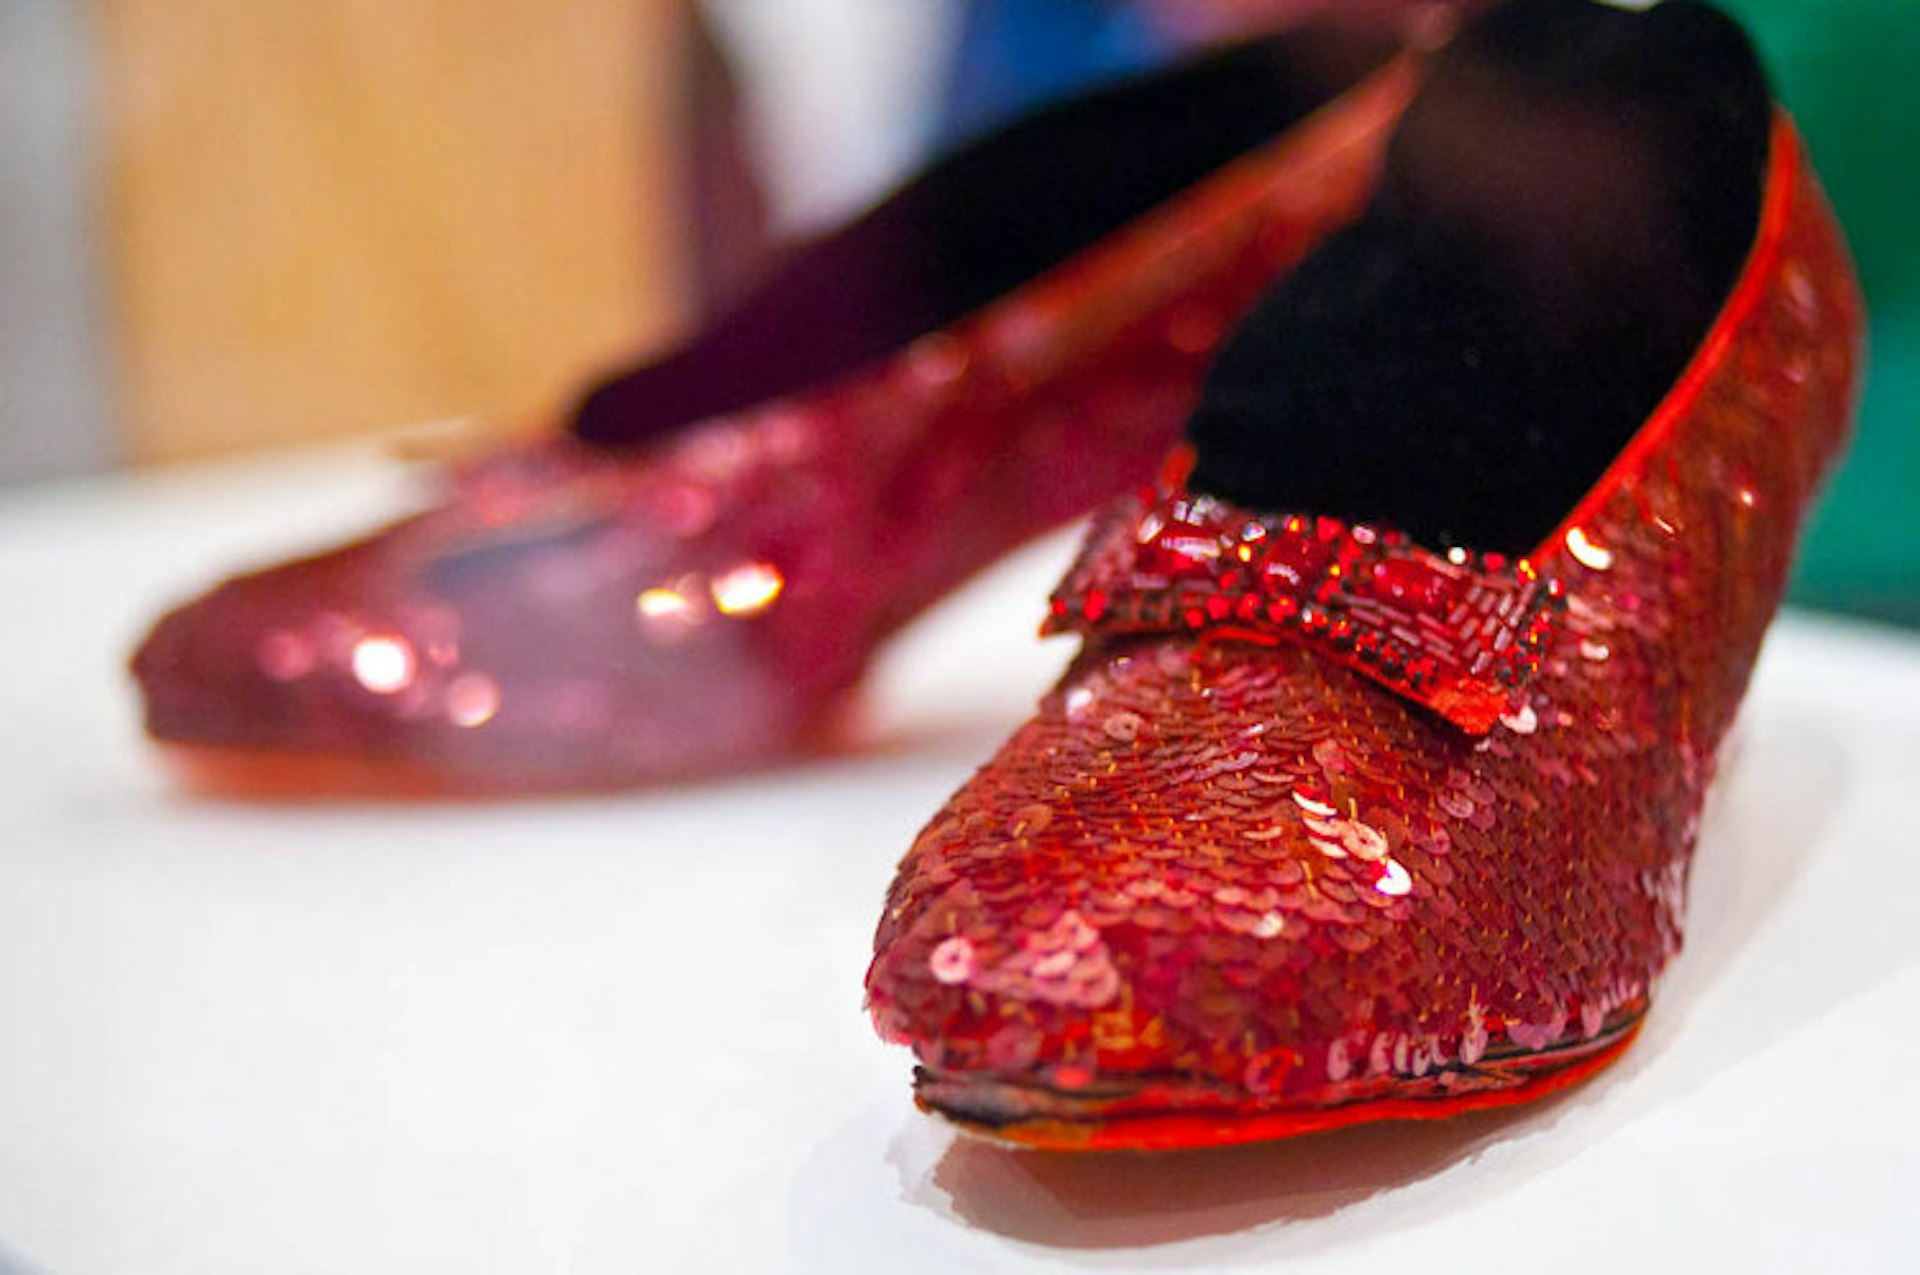 The ruby slippers worn by Judy Garland in The Wizard of Oz at the National Museum of American History. Image by Chris Evans / CC BY 2.0